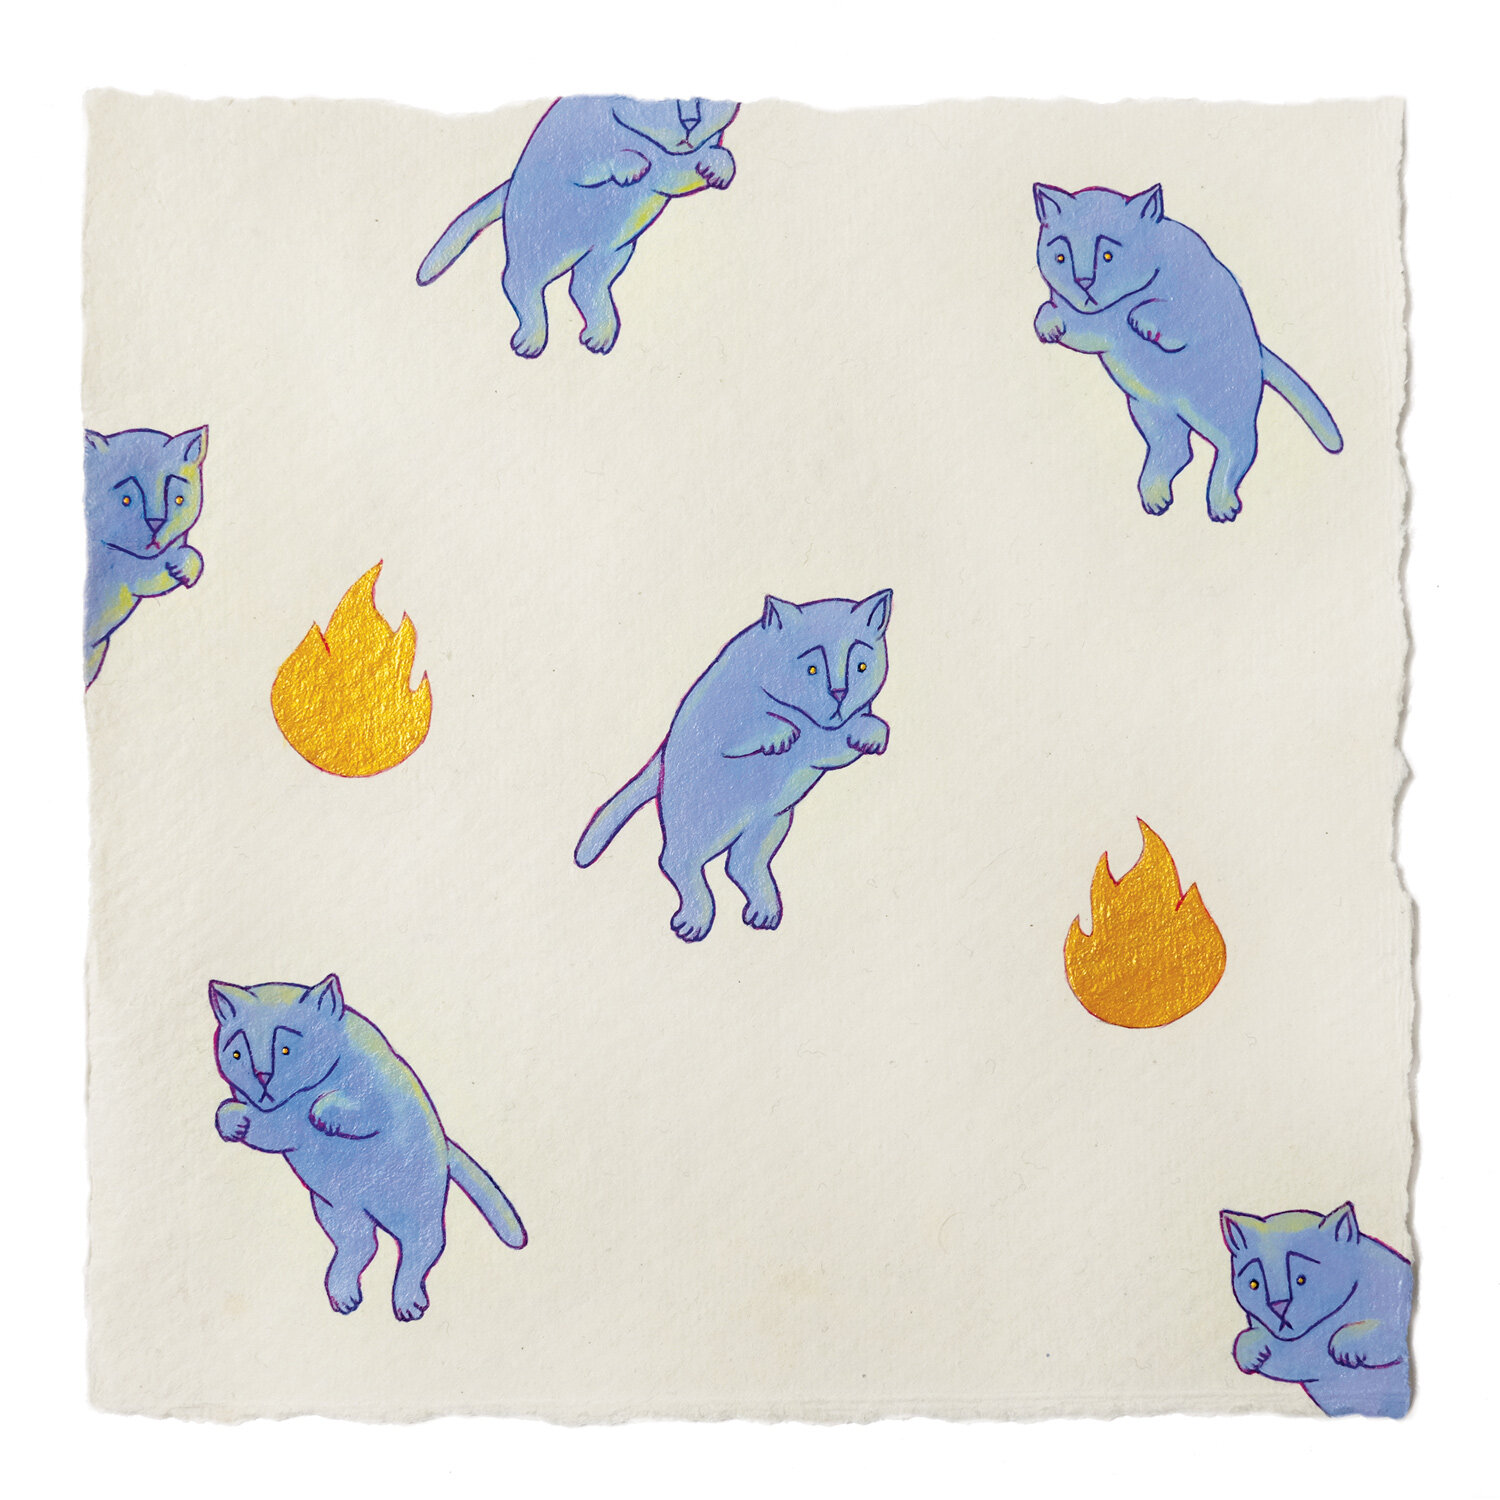   Fire Diary (Cat Leap), &nbsp;2020 Acrylic on paper, 6” x 6” each 